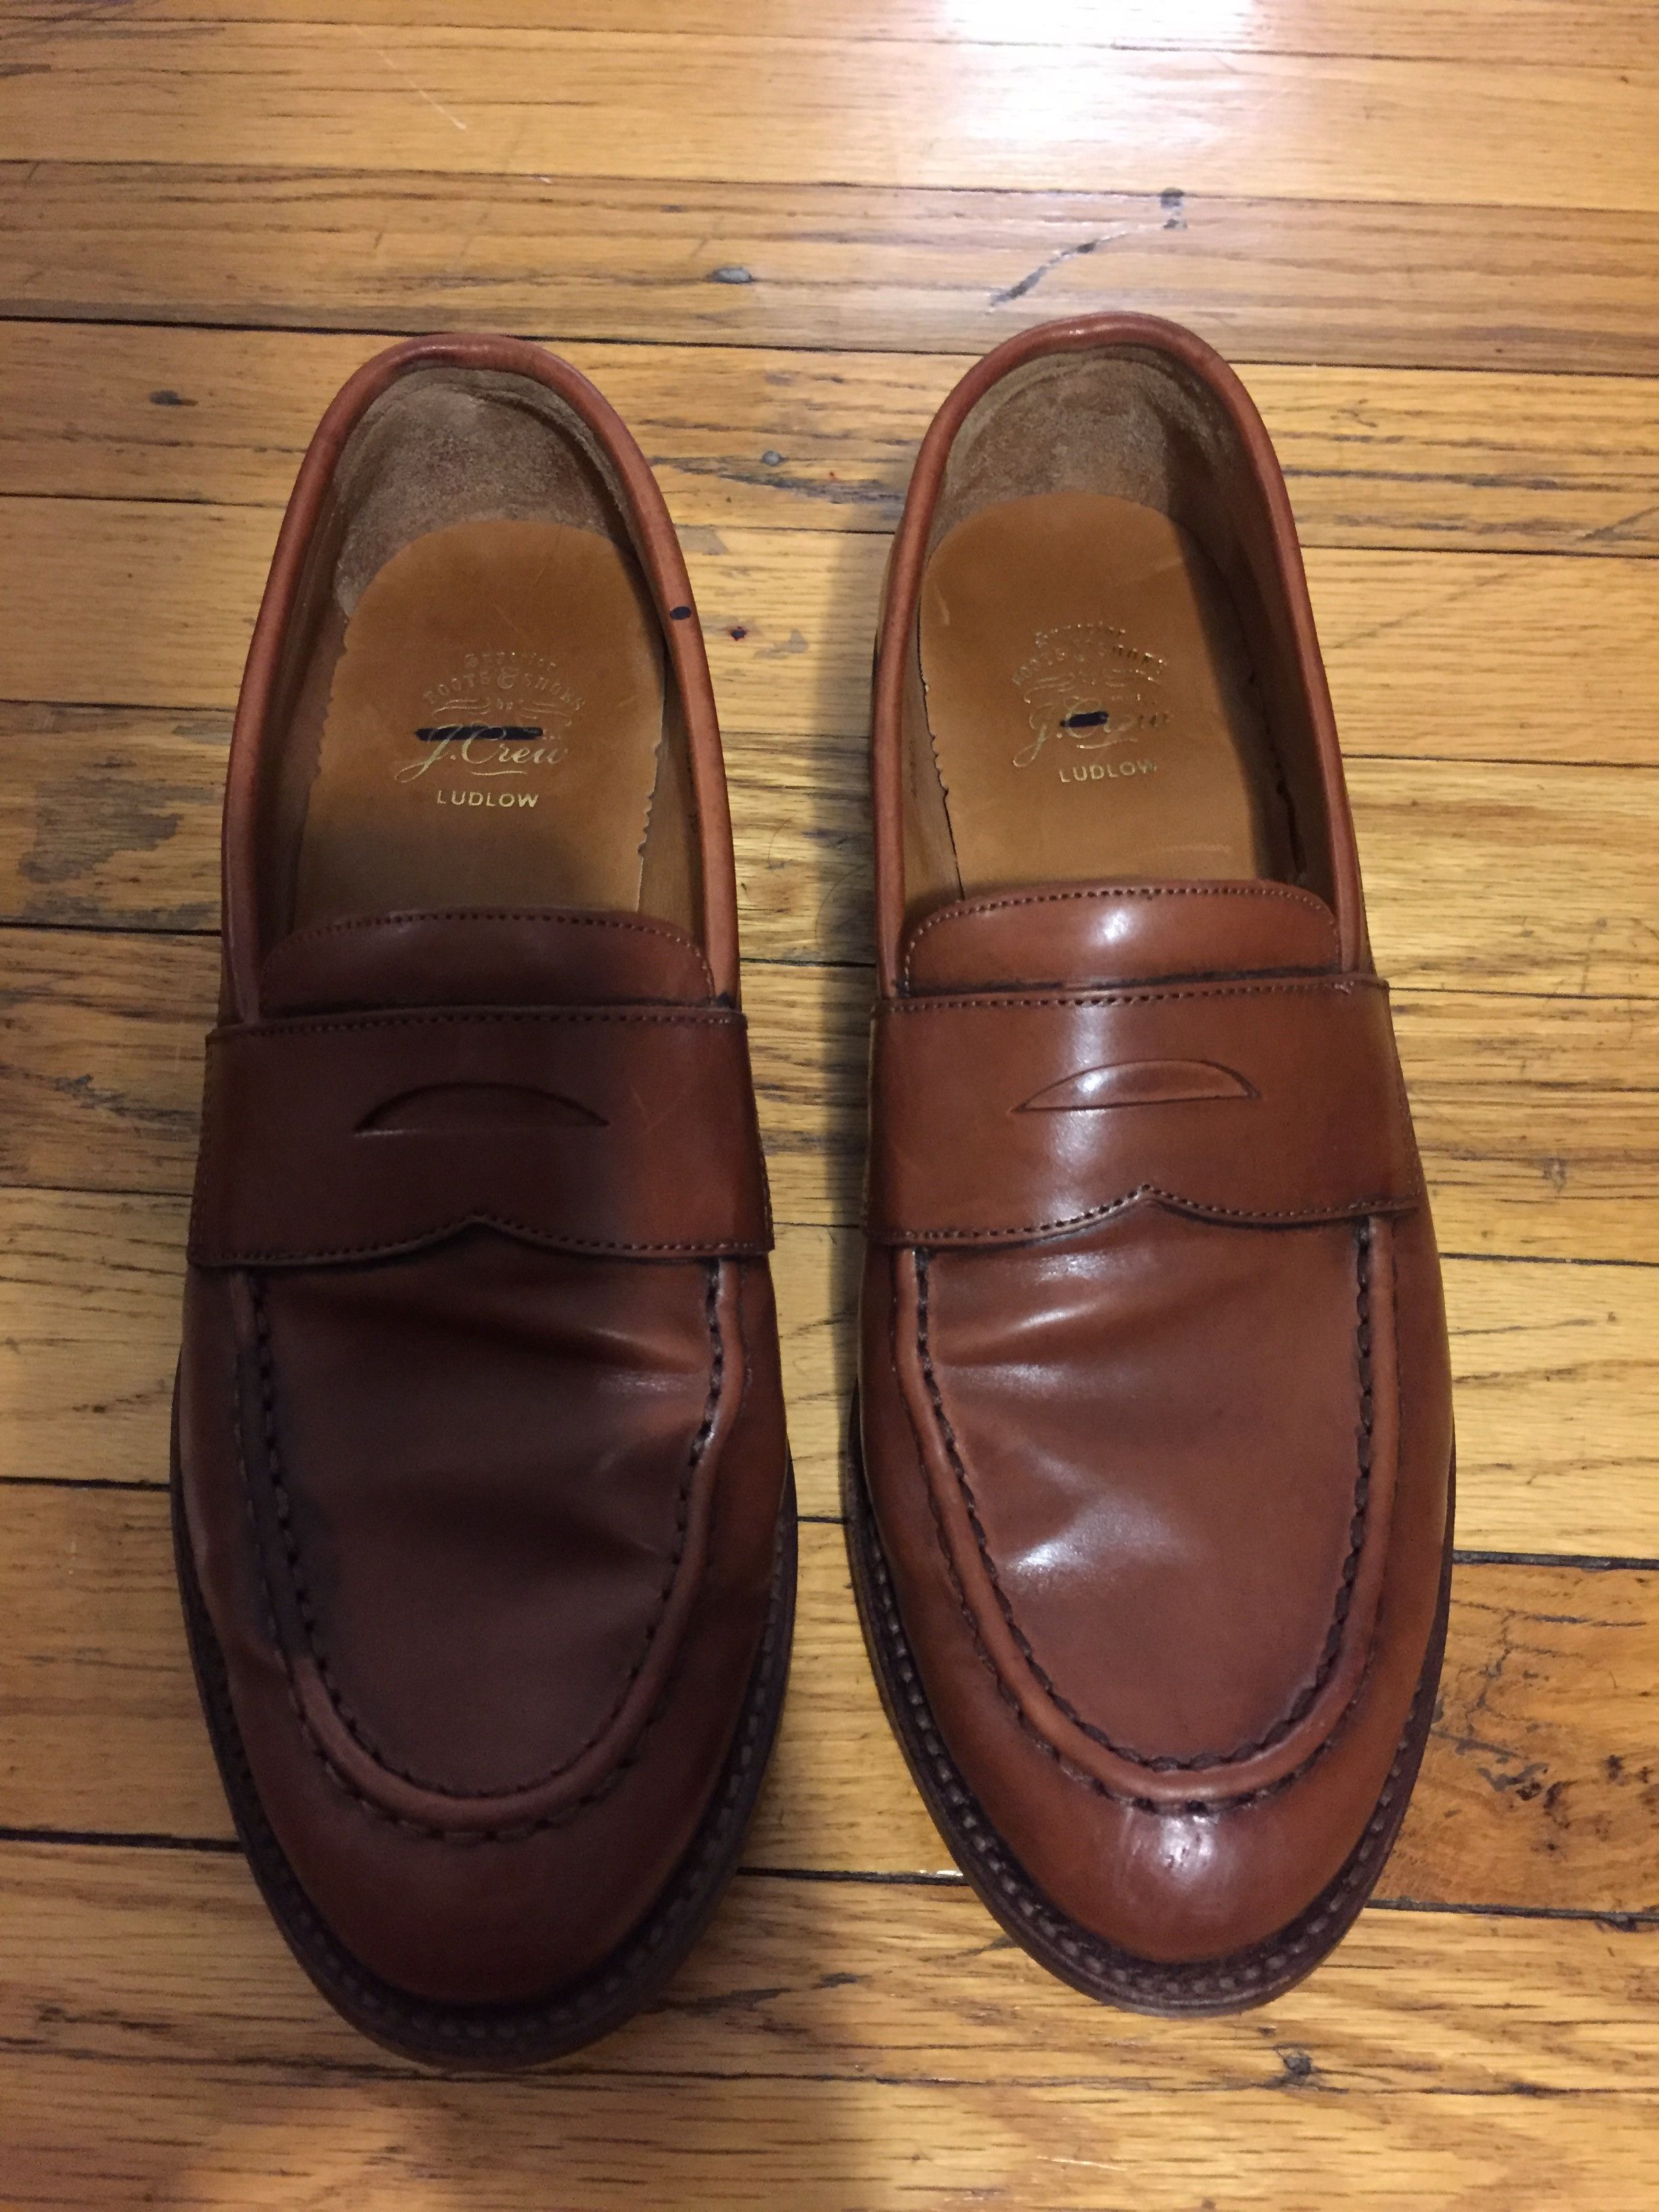 J.Crew Ludlow Penny Loafer (English Tan) Size US 9 / EU 42 - 2 Preview